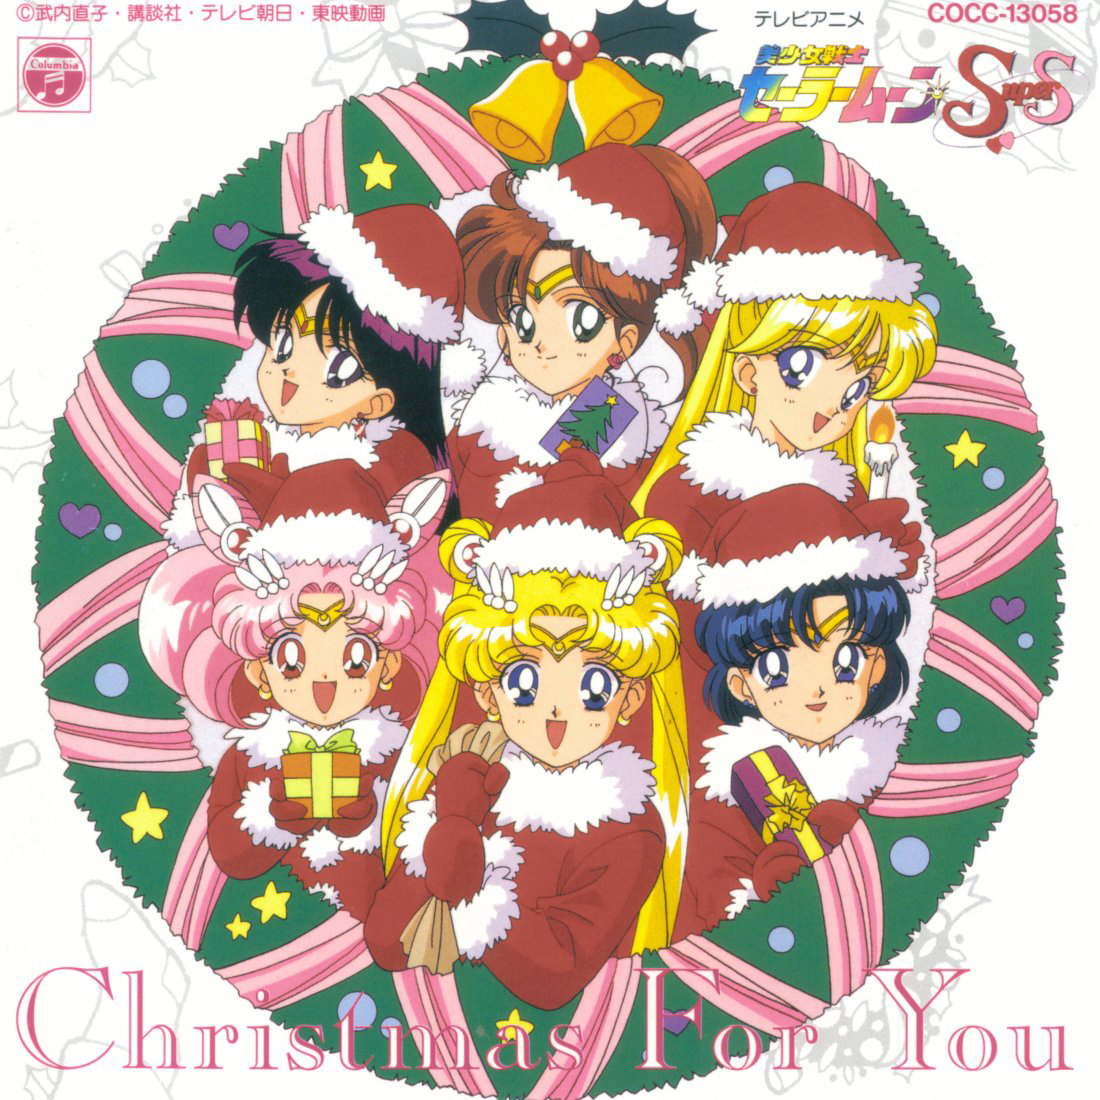 Sailor Moon Christmas image featuring cover artwork for Sailor Moon SuperS Christmas CD album.